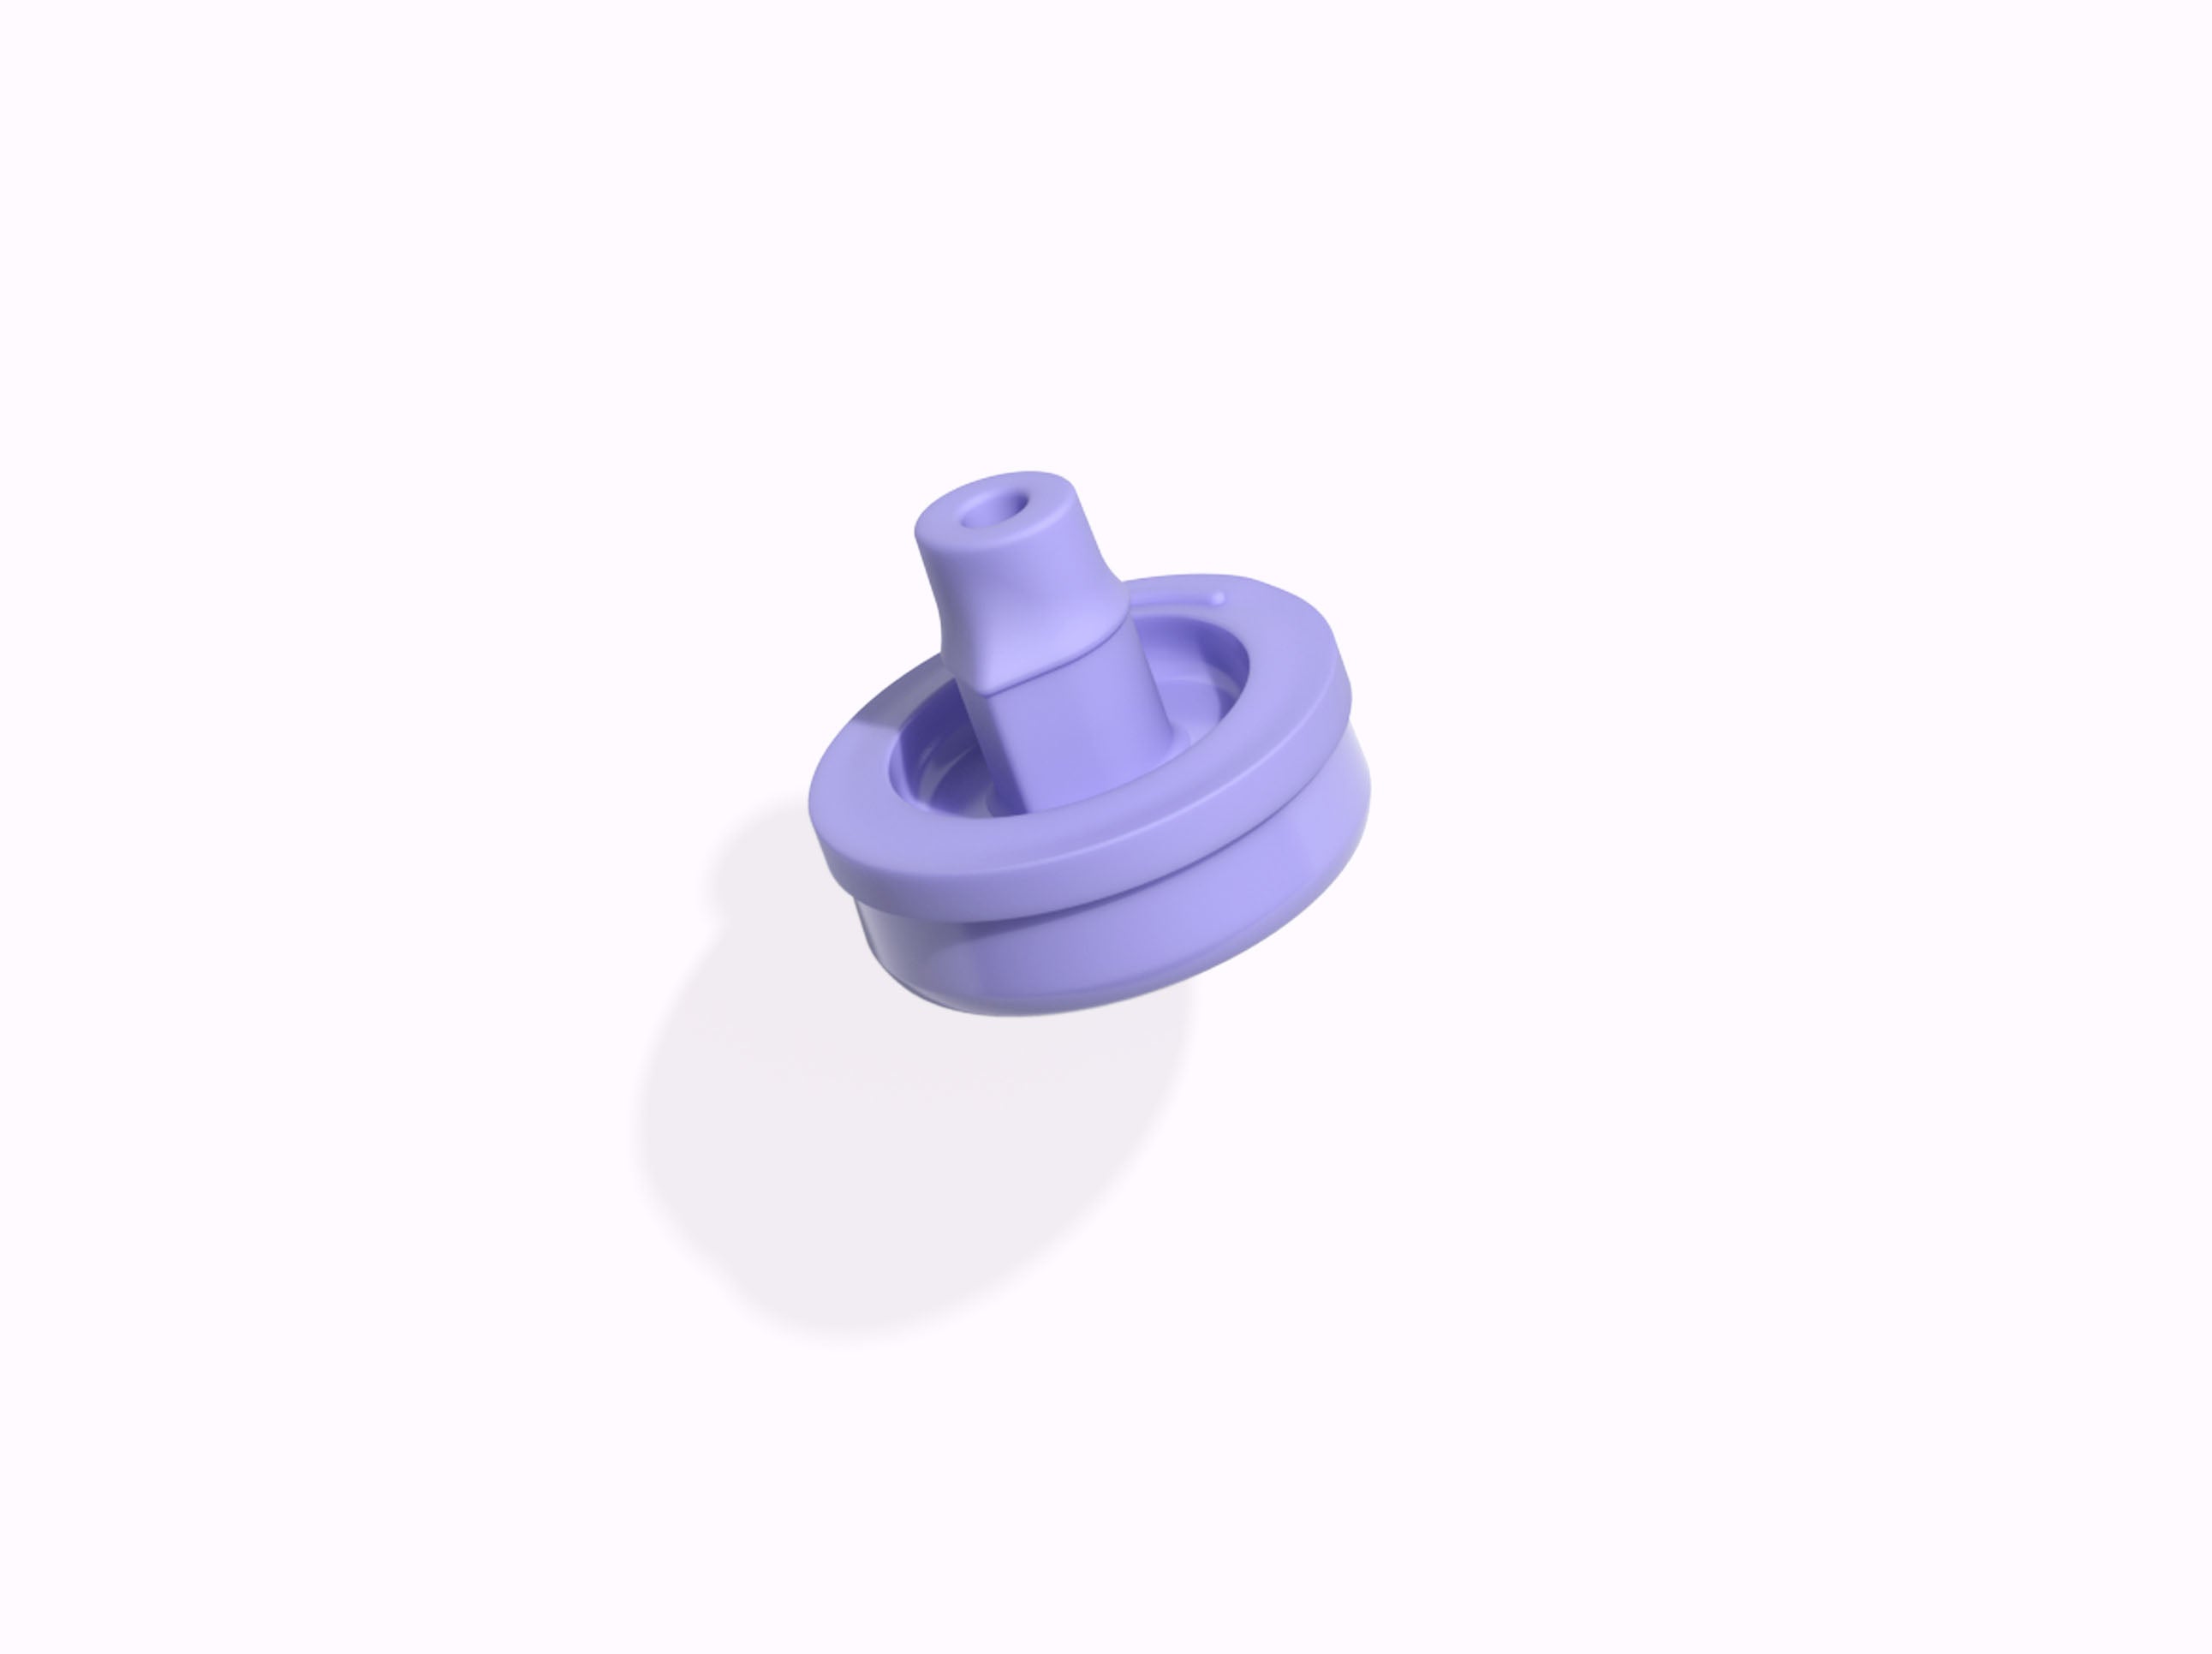 https://cdn.shopify.com/s/files/1/0635/3610/3657/products/AirUp_Accessories_Mouthpiece_SoftLilac.jpg?v=1675889138